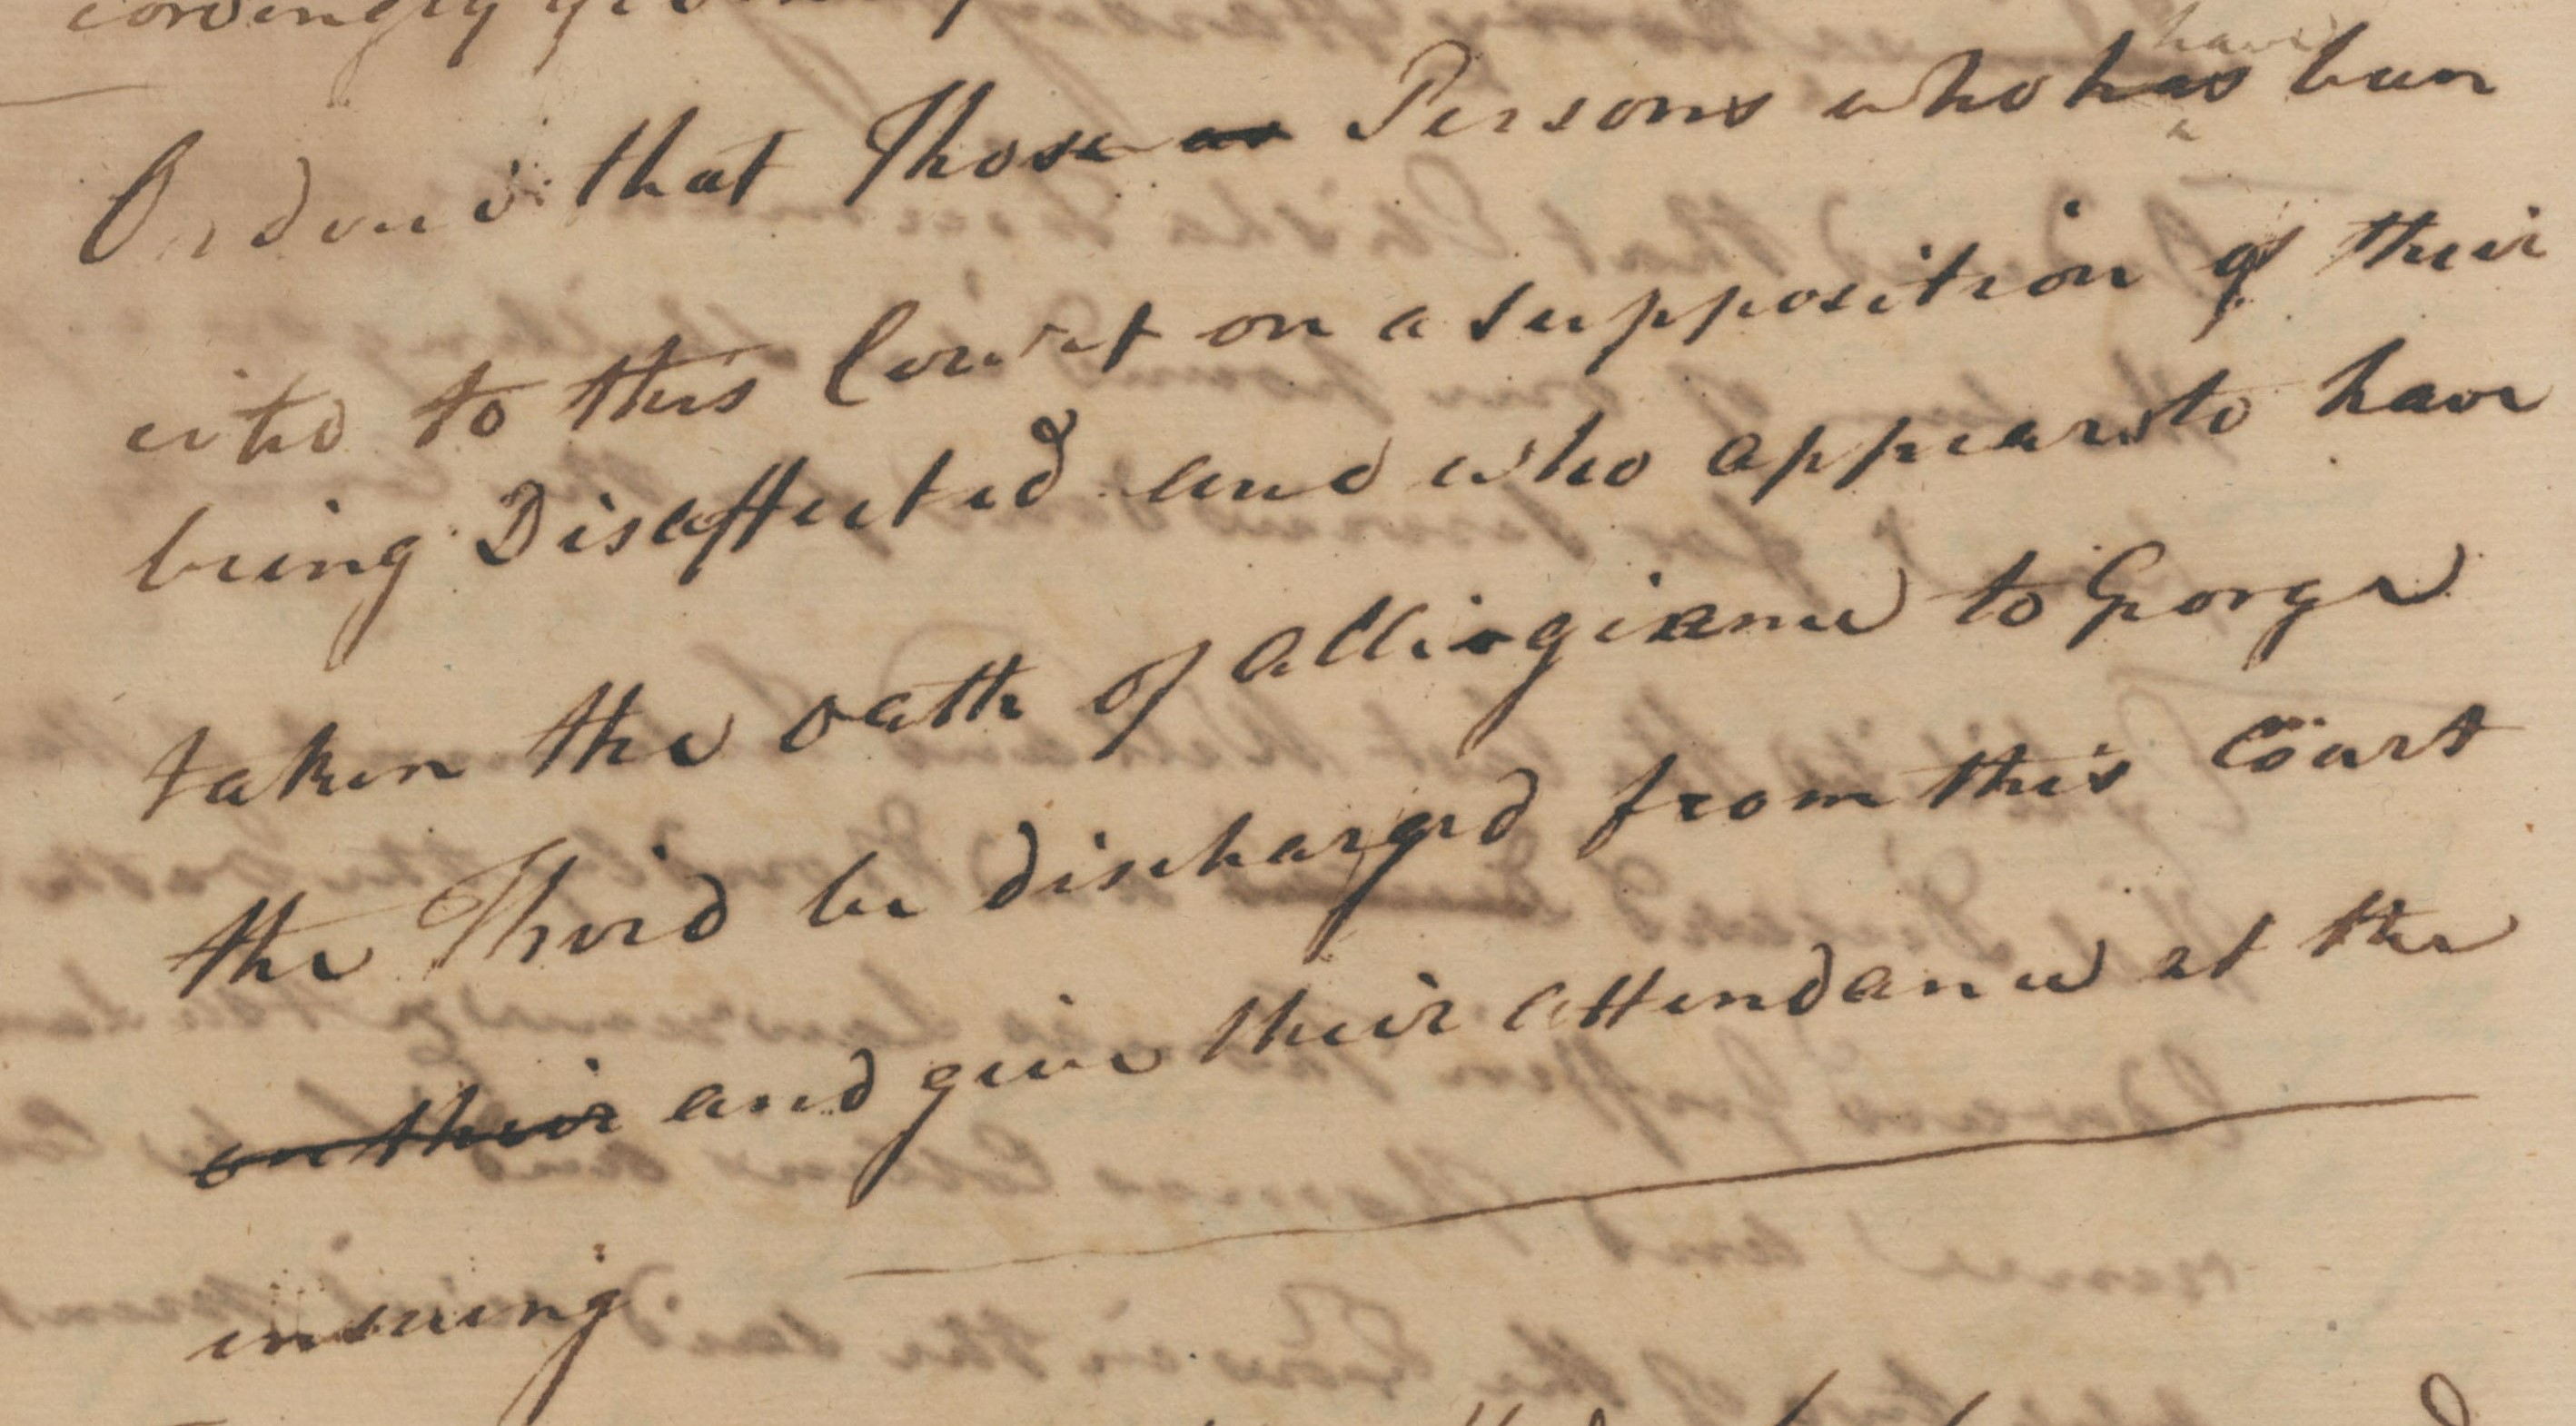 Extract of Minutes of the Bertie County Court of Pleas and Quarter Sessions, November 1777, page 1